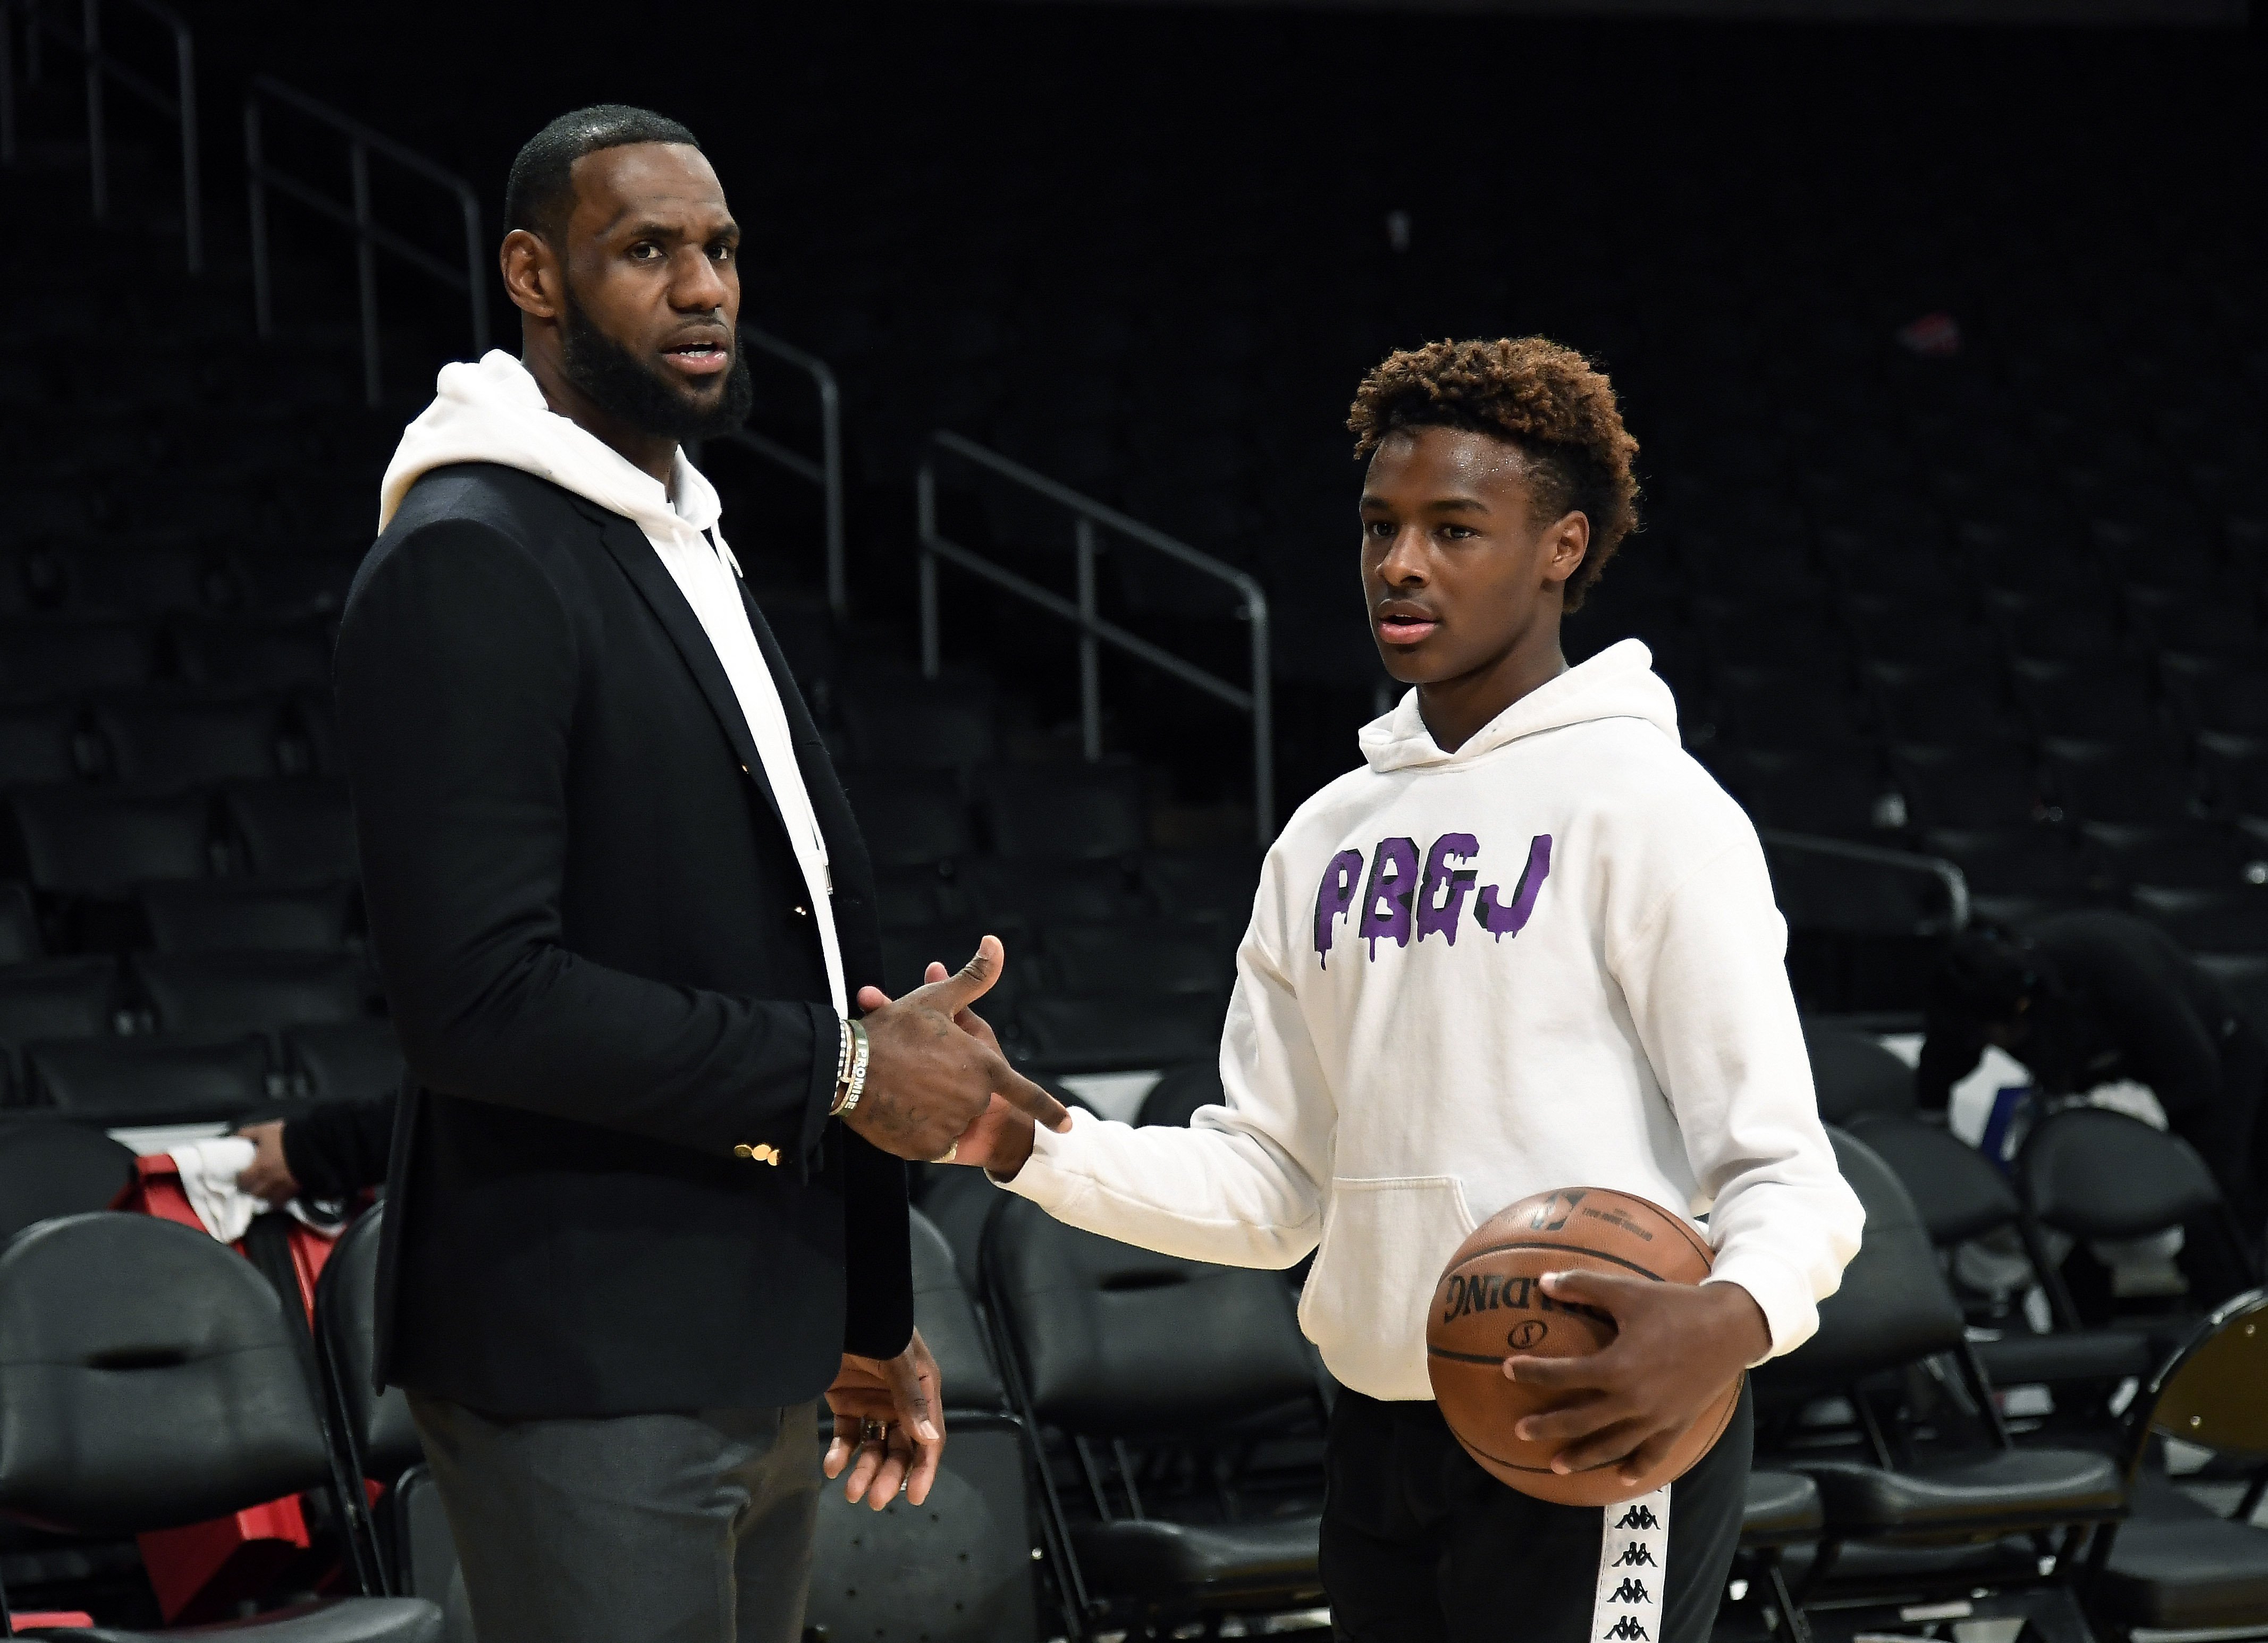 LeBron James and his son LeBron James Jr., on the court after a game on Dec. 28, 2018 in California | Photo: Getty Images